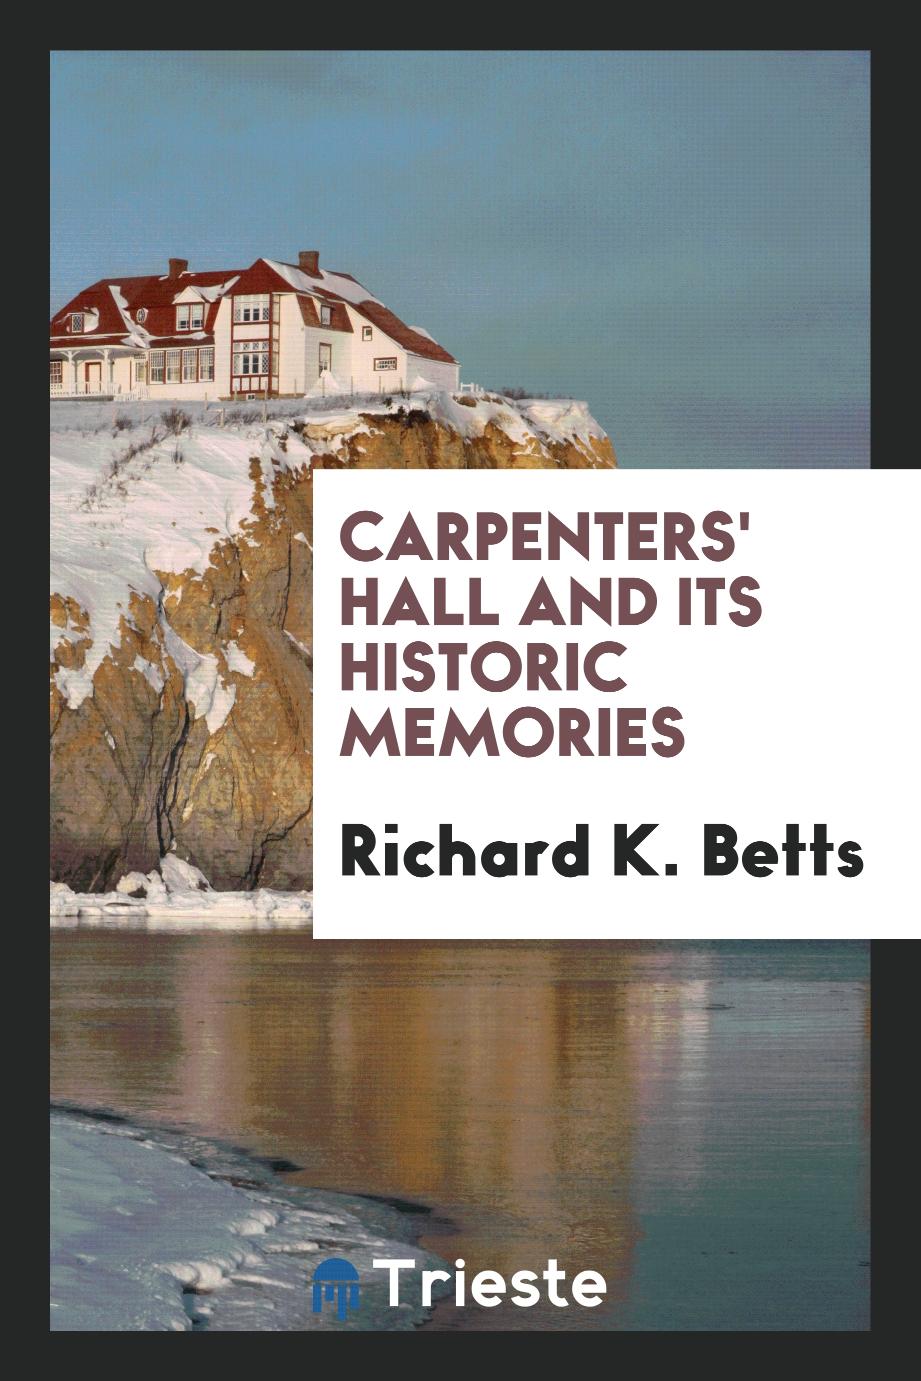 Carpenters' hall and its historic memories